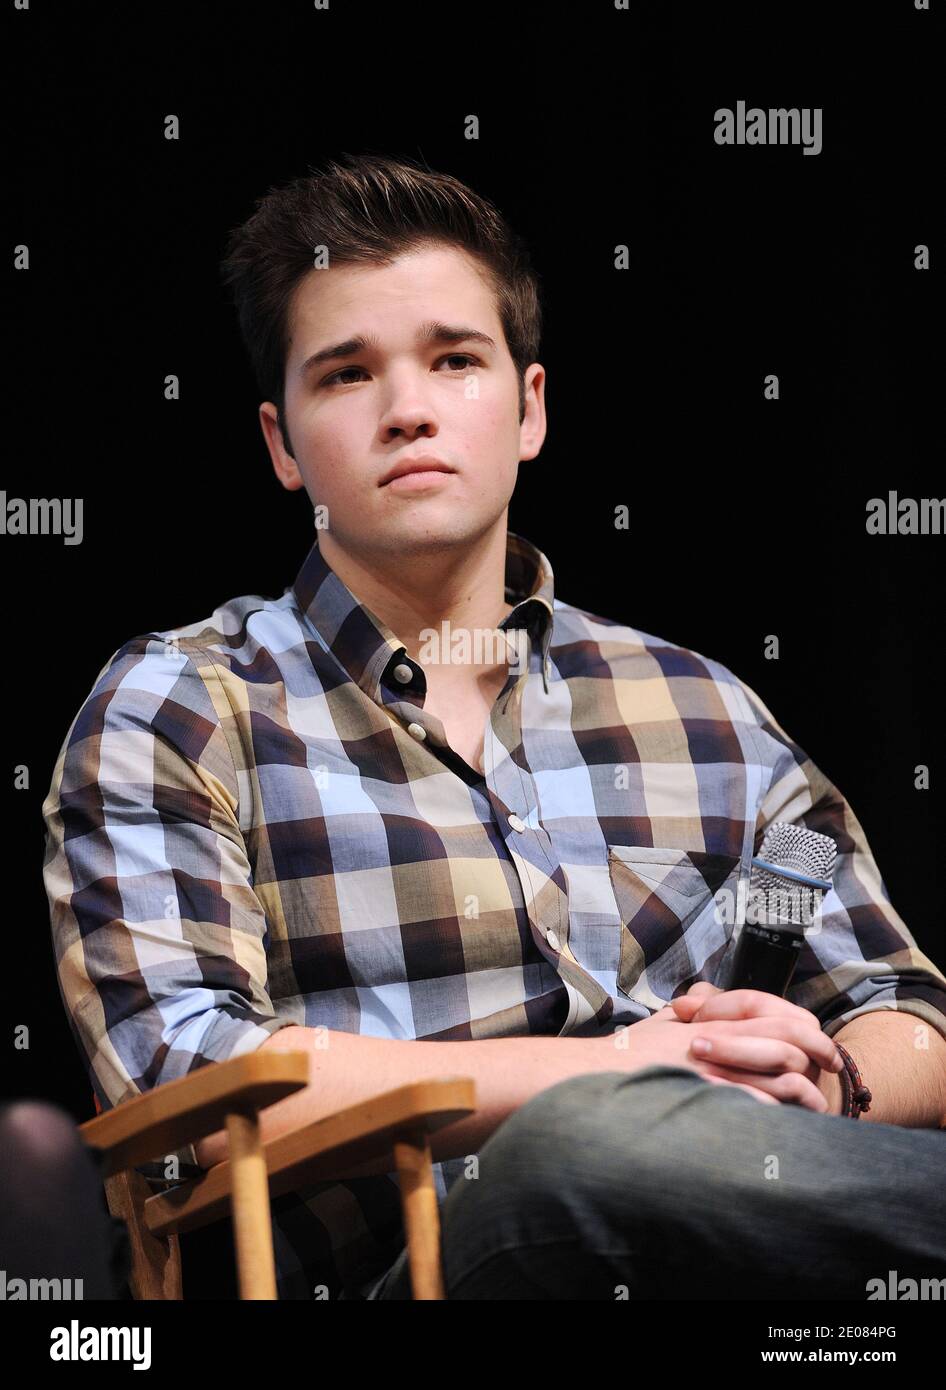 Cast member of the Nickelodeon television show iCarly Nathan Kress attends a screening of an episode of the show featuring Obama at Hayfield Secondary School in Alexandria, VA, USA, on January 13, 2012. Michelle Obama appears on an episode honoring military families and kids which will air on the children's cable network January 16. Photo by Olivier Douliery/ABACAPRESS.COM Stock Photo